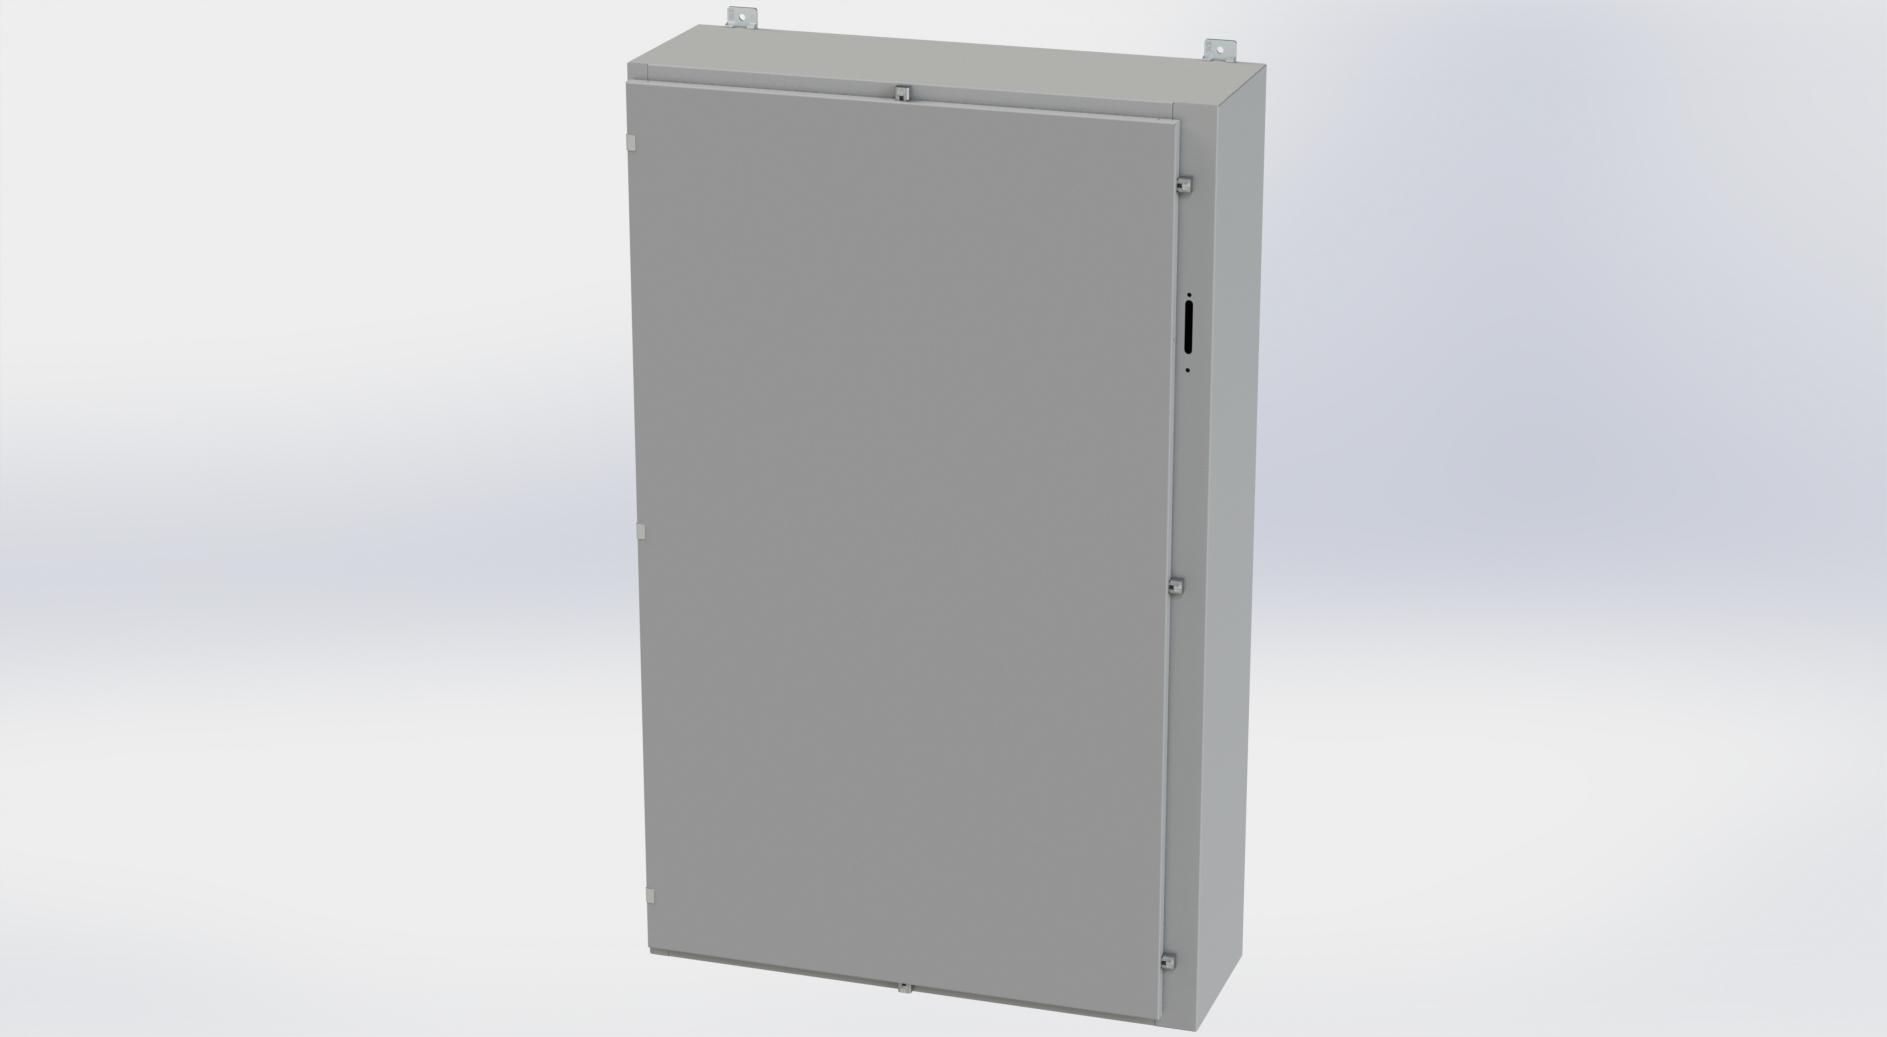 Saginaw Control SCE-60HS3712LP HS LP Enclosure, Height:60.00", Width:37.38", Depth:12.00", ANSI-61 gray powder coating inside and out. Optional sub-panels are powder coated white.